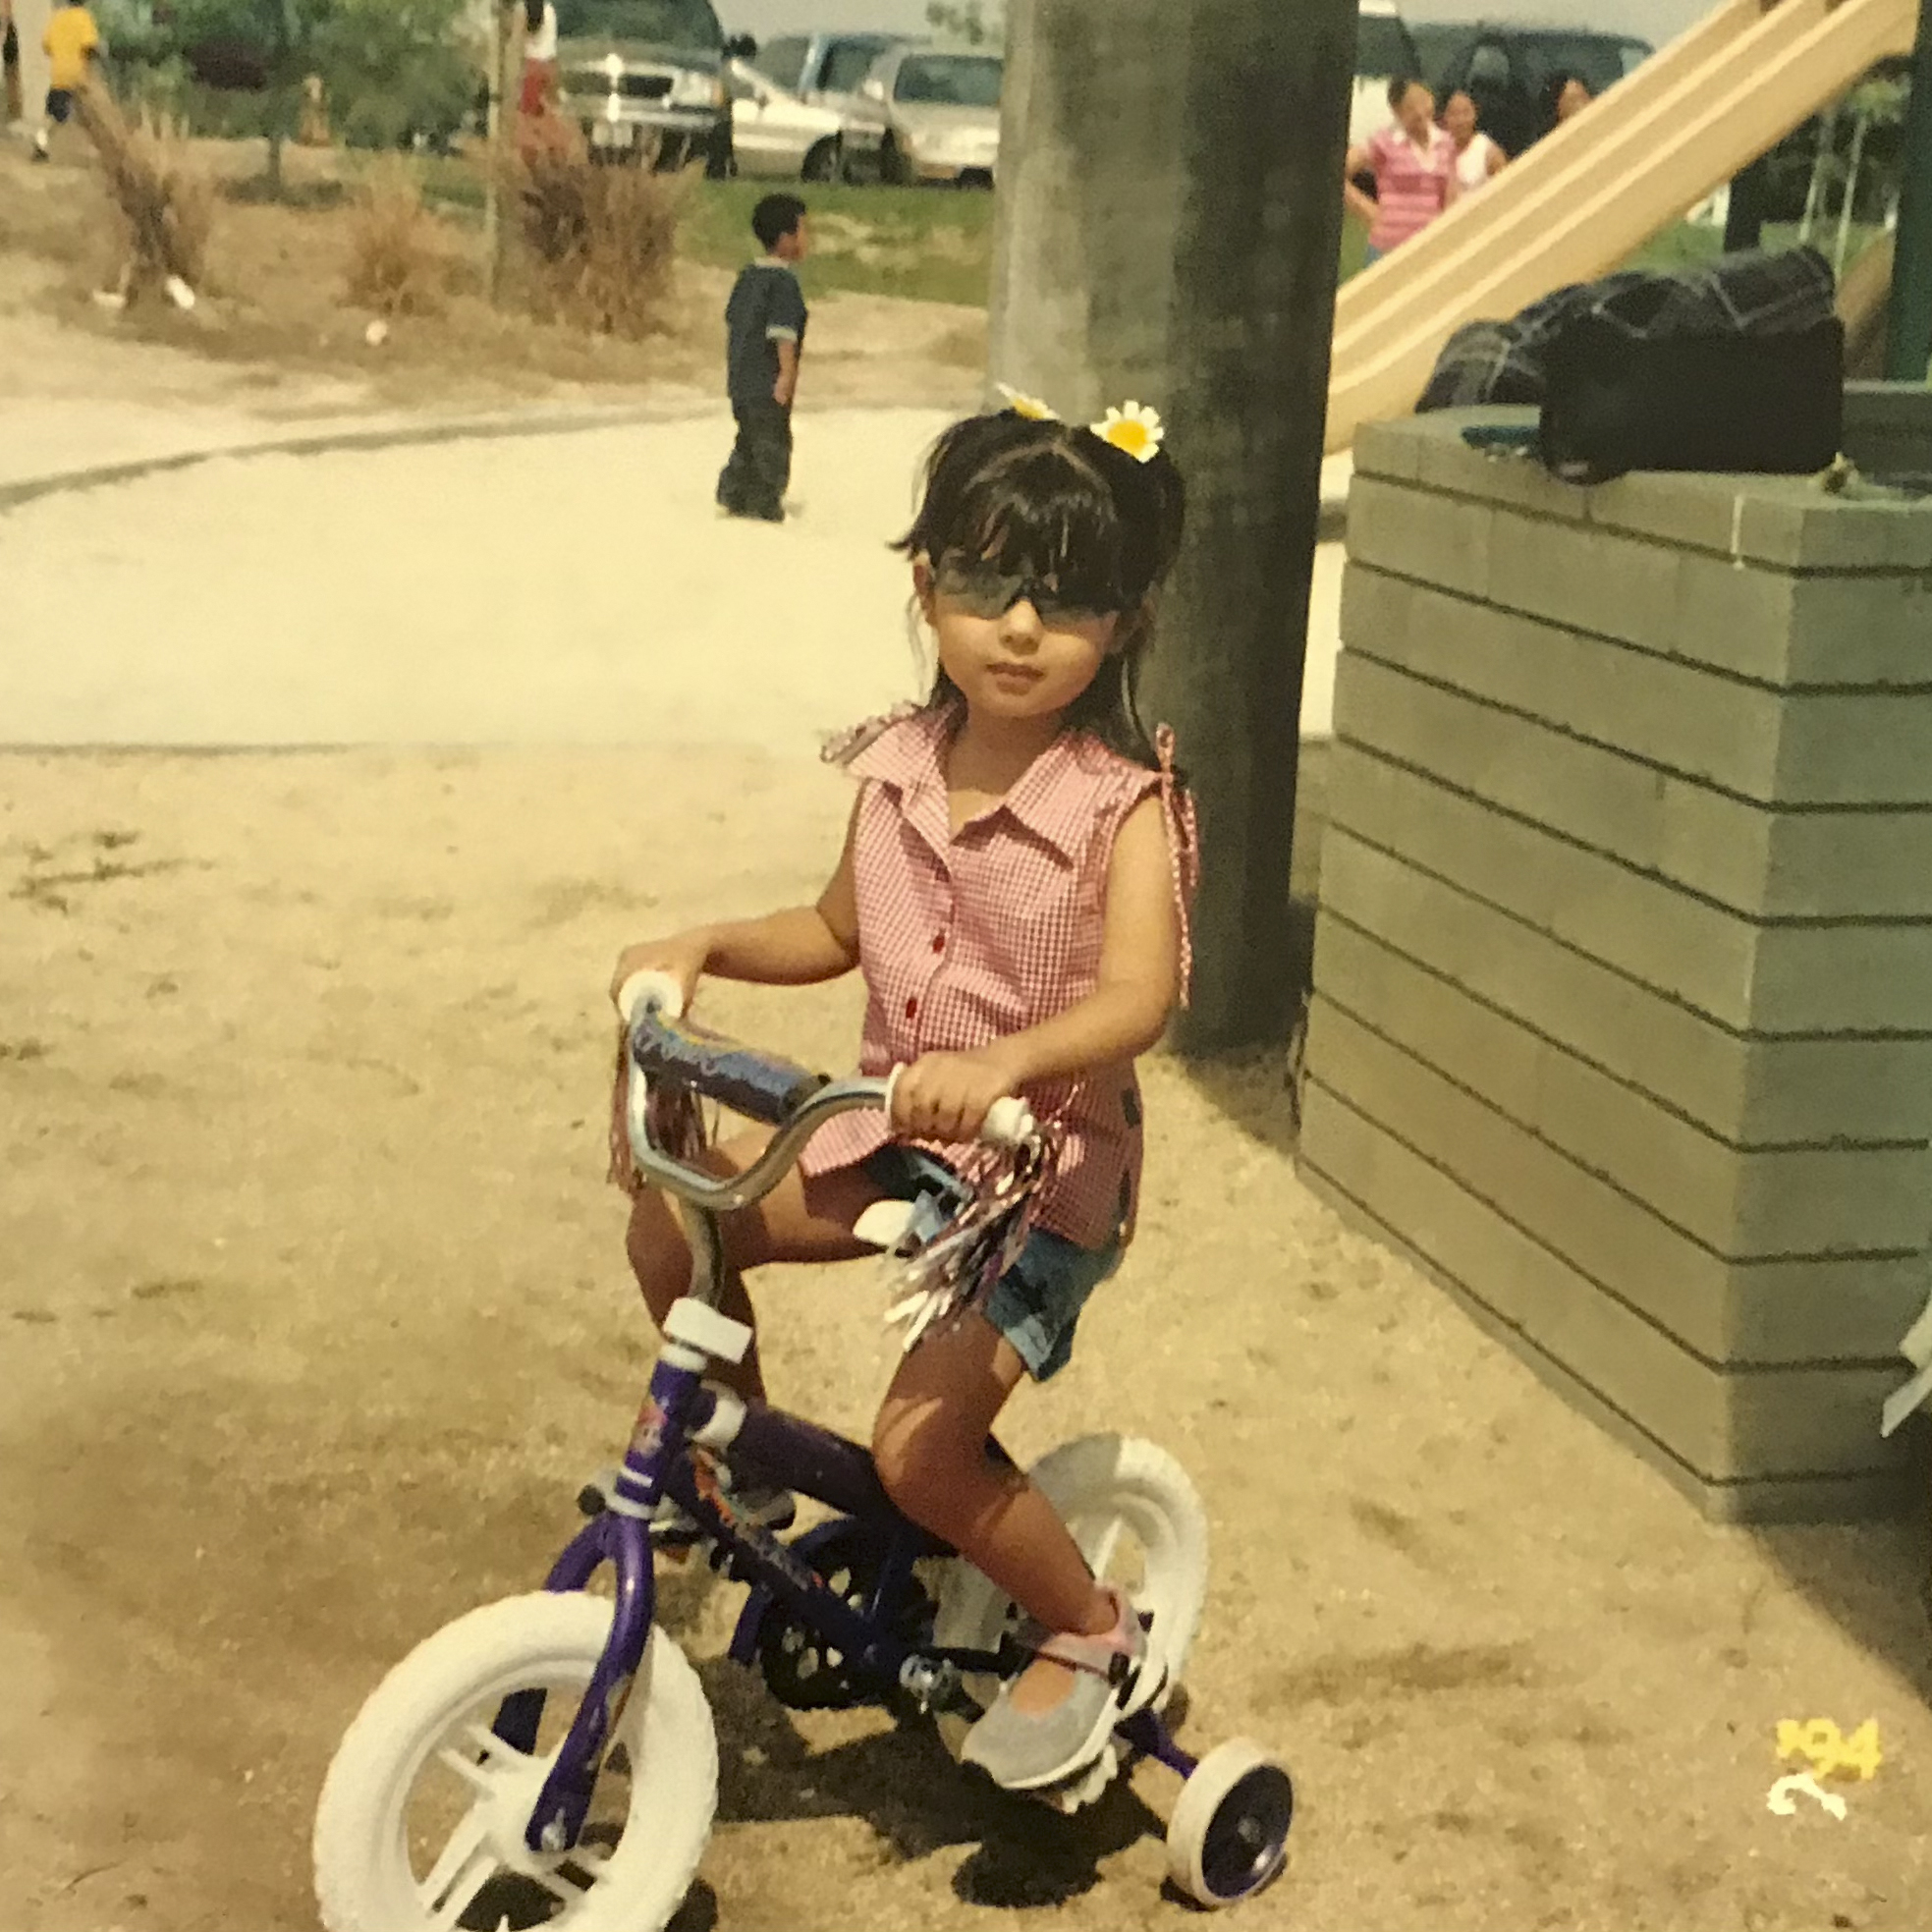 Kim riding a tricycle